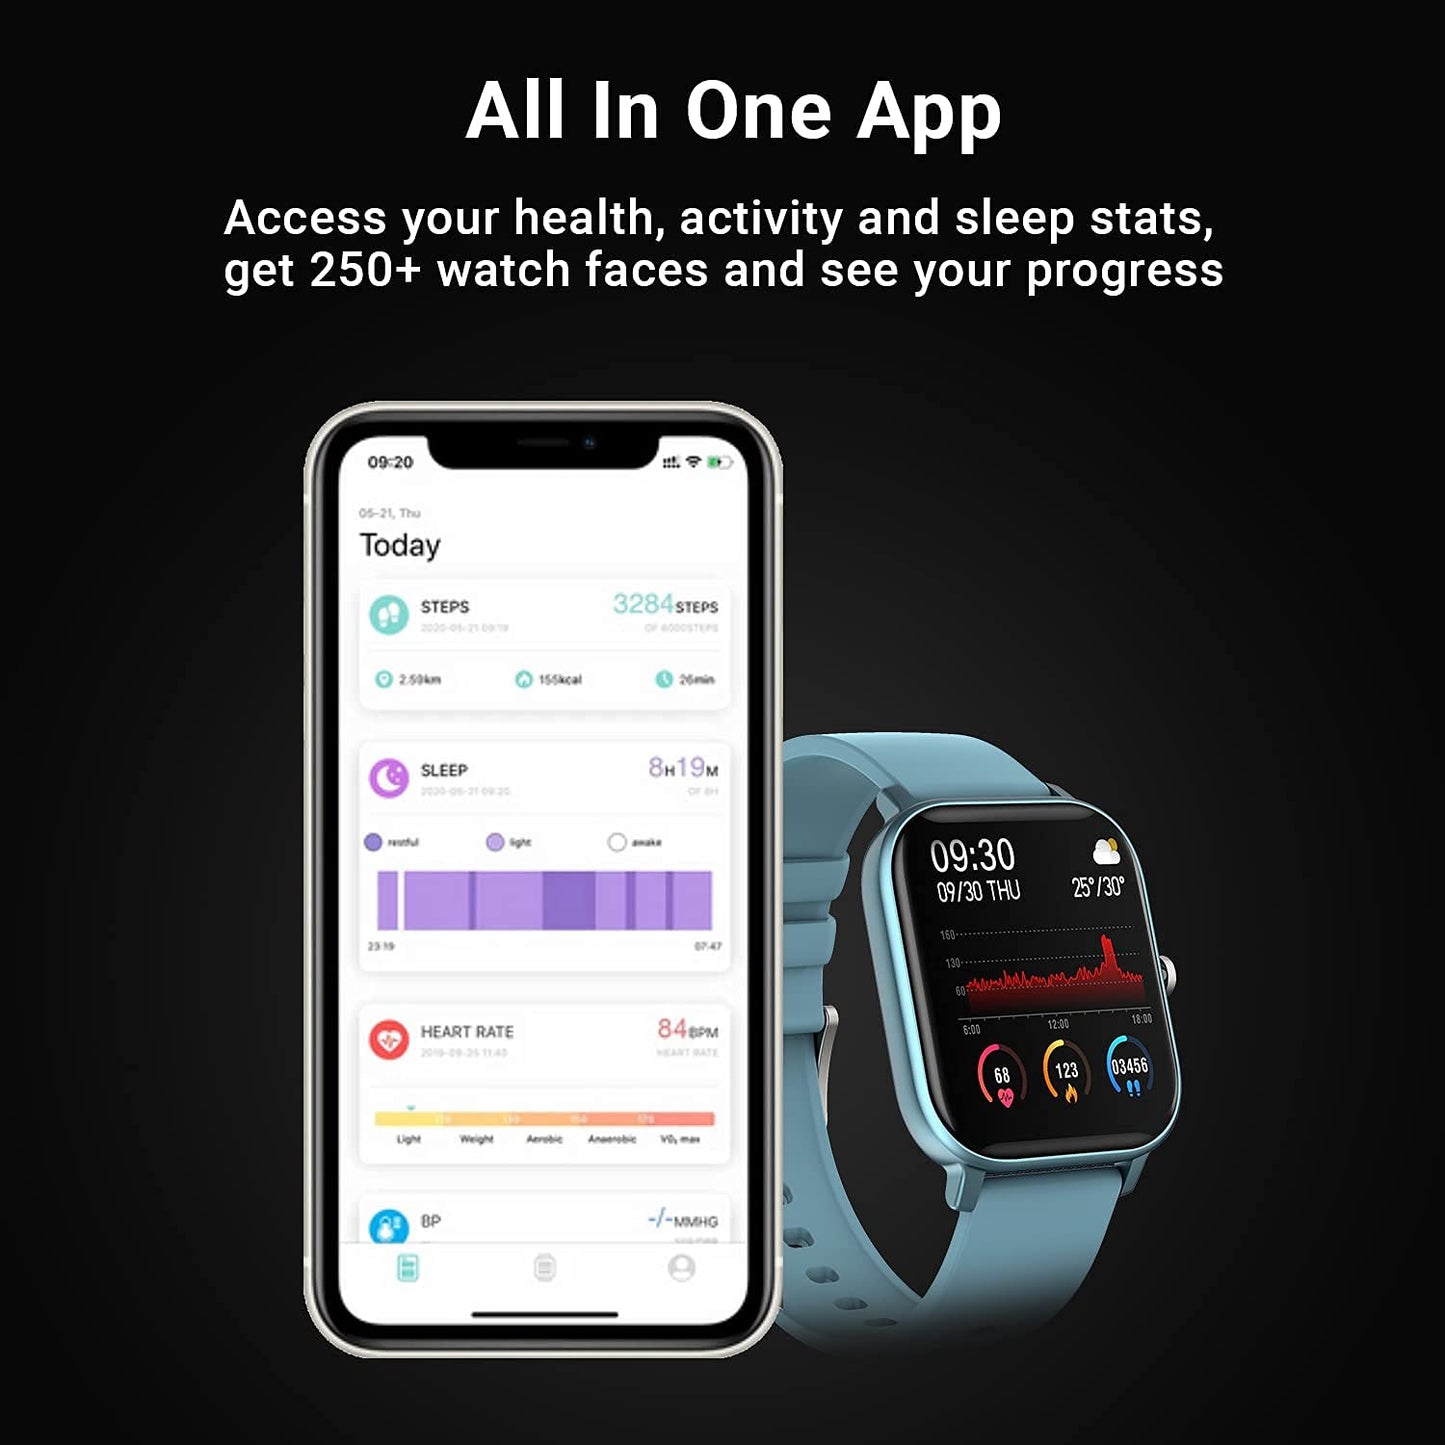 Fire-Boltt (Renewed) SpO2 Full Touch 1.4 inch Smart Watch 400 Nits Peak Brightness Metal Body with 24 * 7 Heart Rate Monitoring IPX7 with Blood Oxygen, Fitness, Sports & Sleep Tracking (Blue)